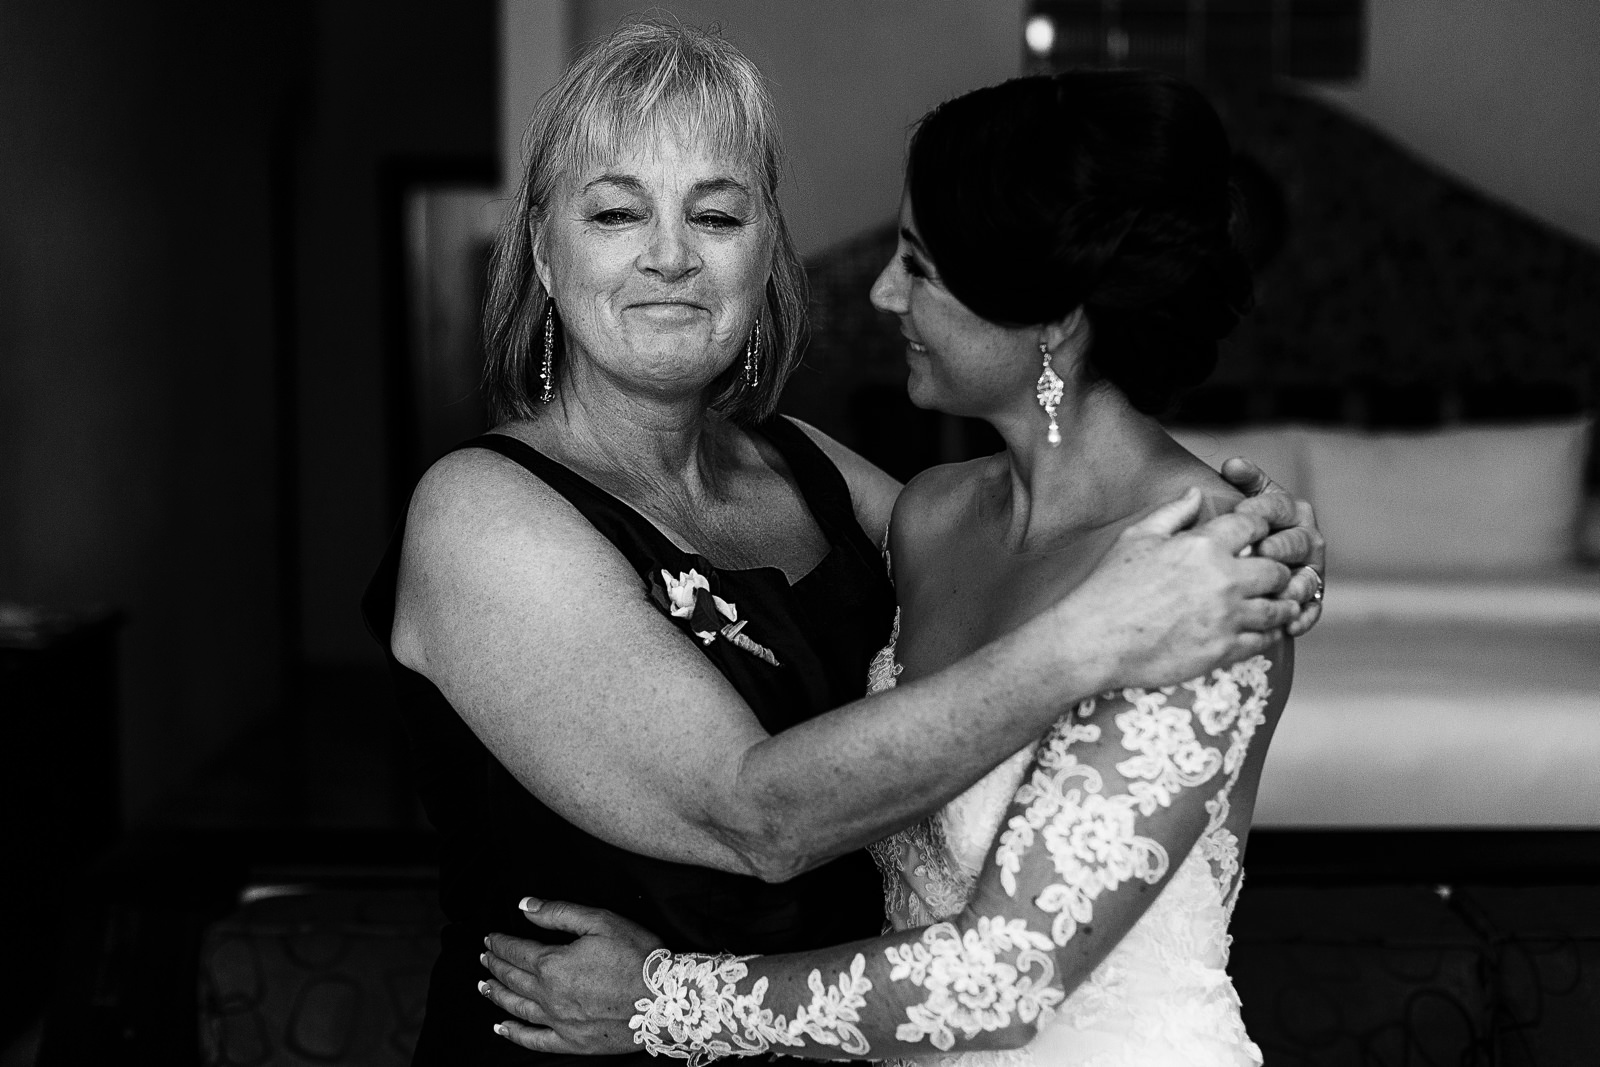 Aunt of the bride crying after a hug